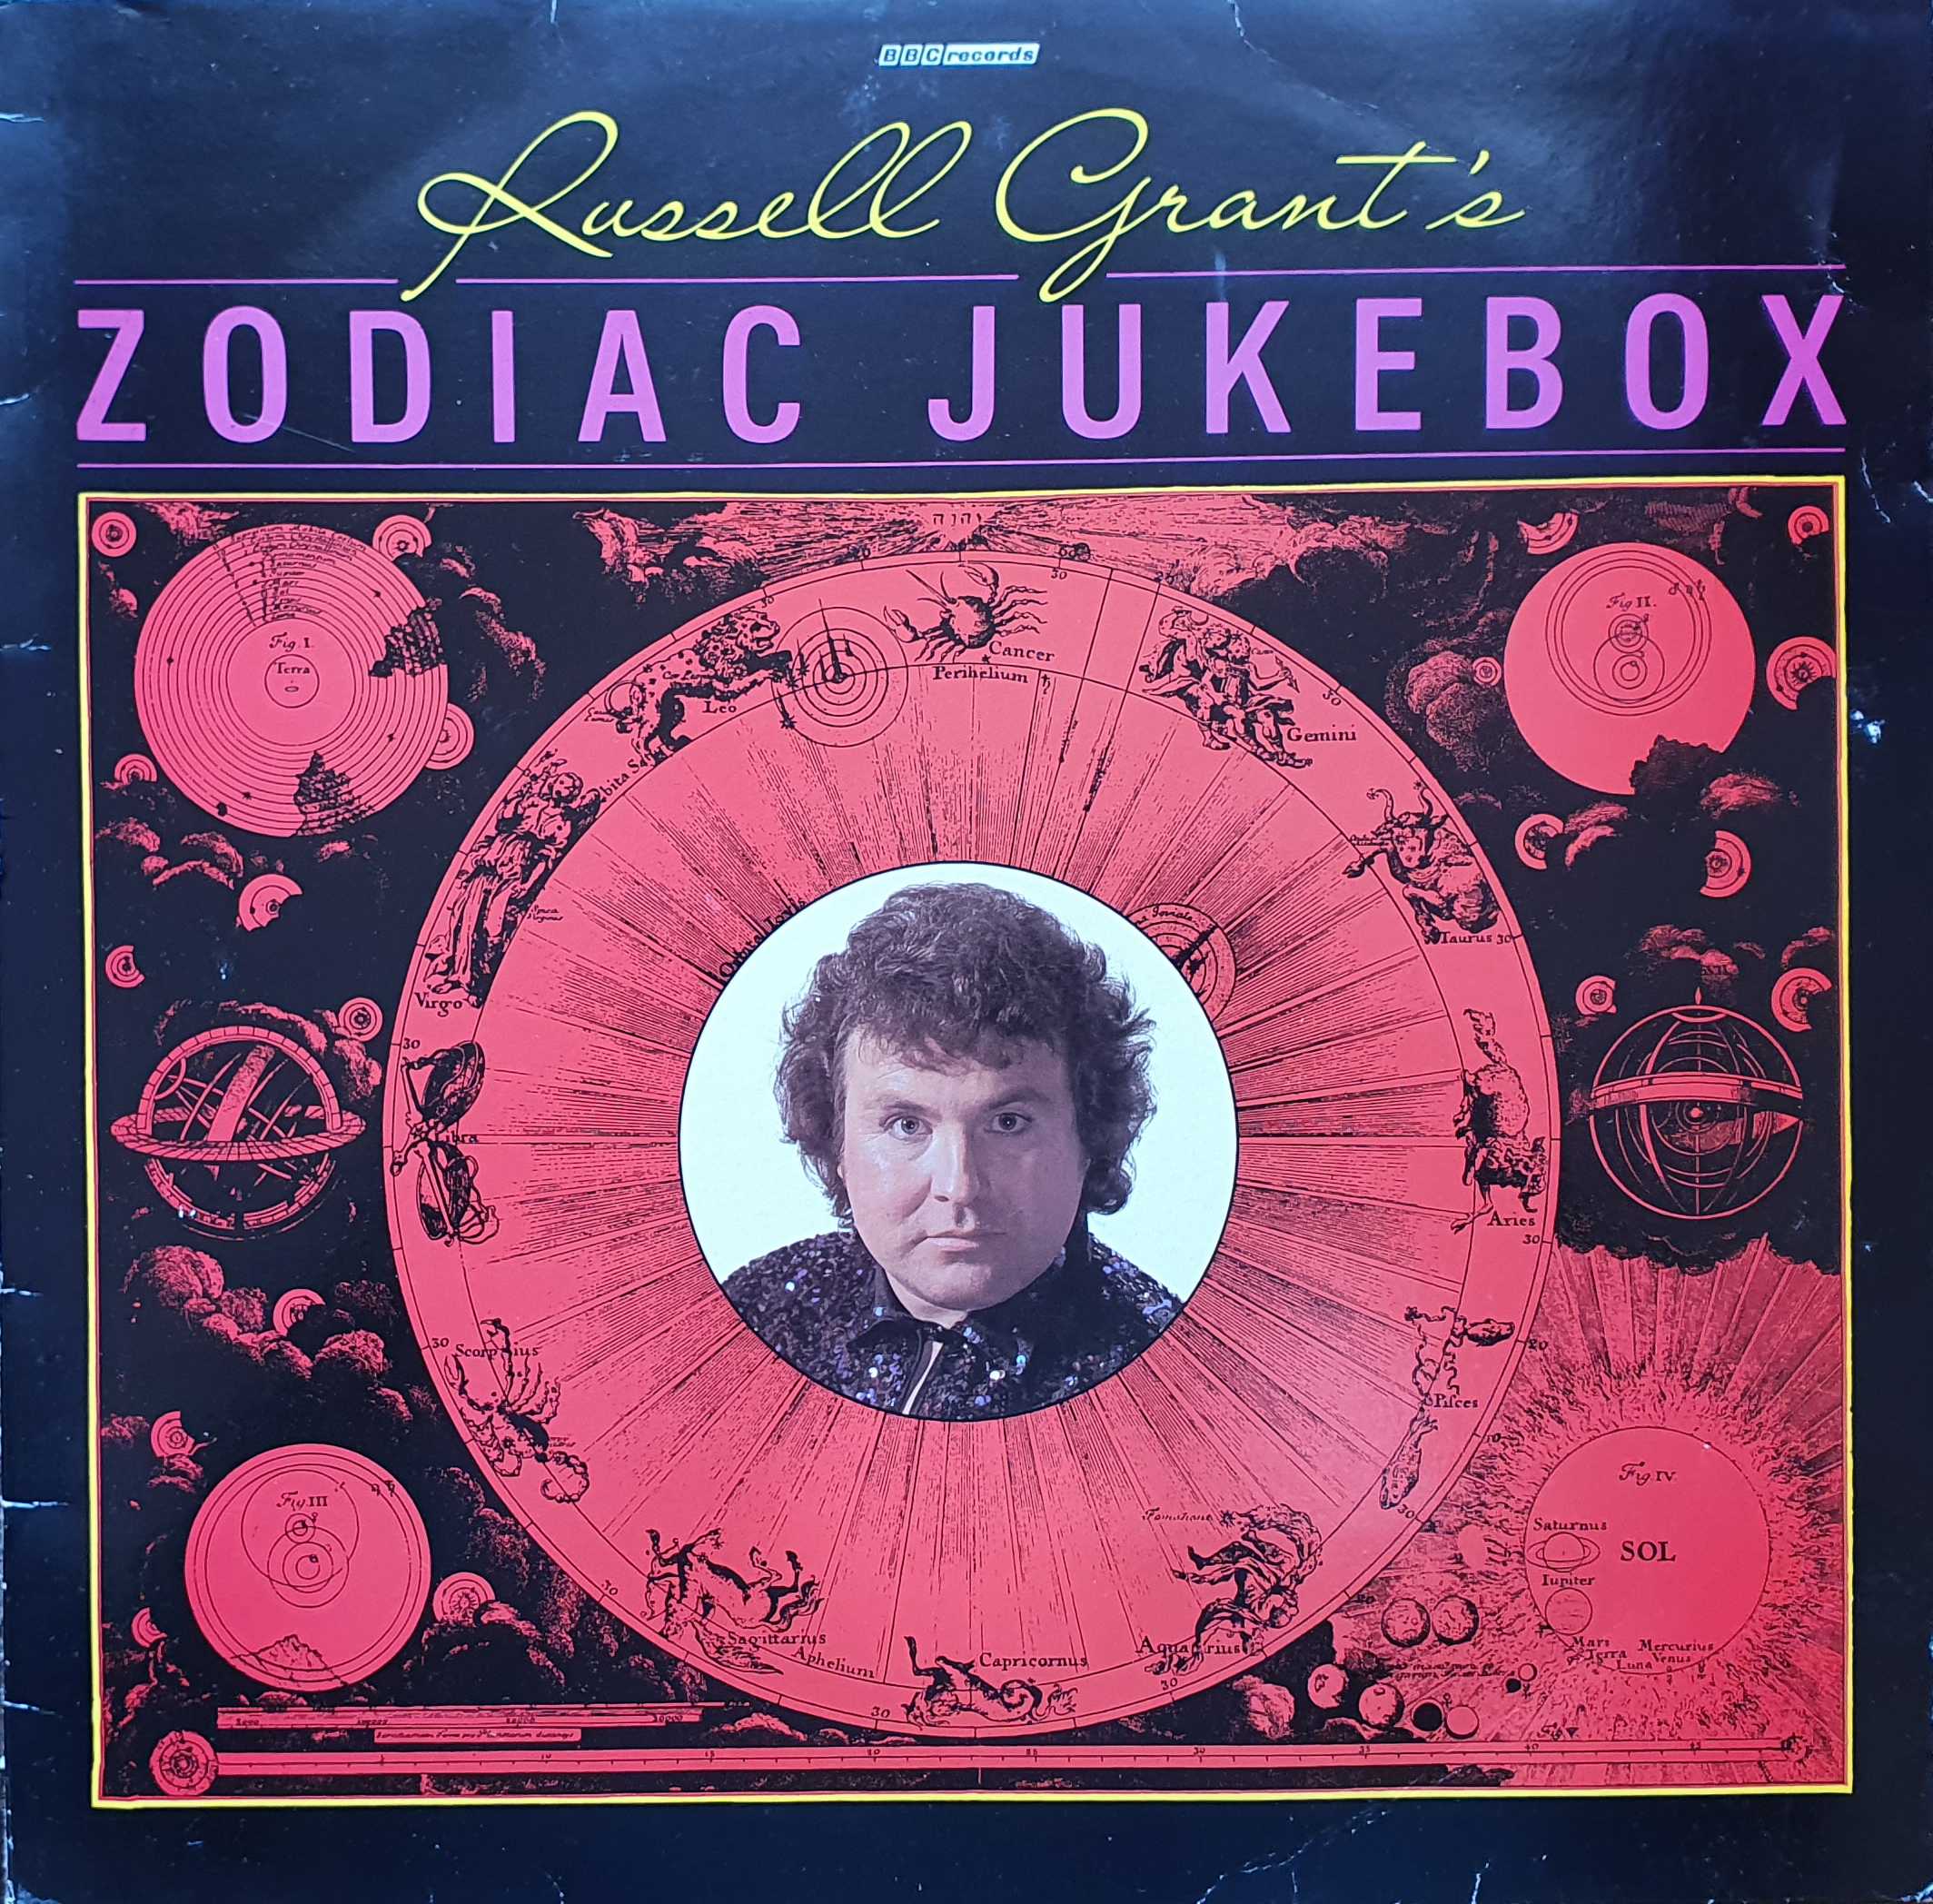 Picture of REH 491 Zodiac jukebox by artist Russell Grant